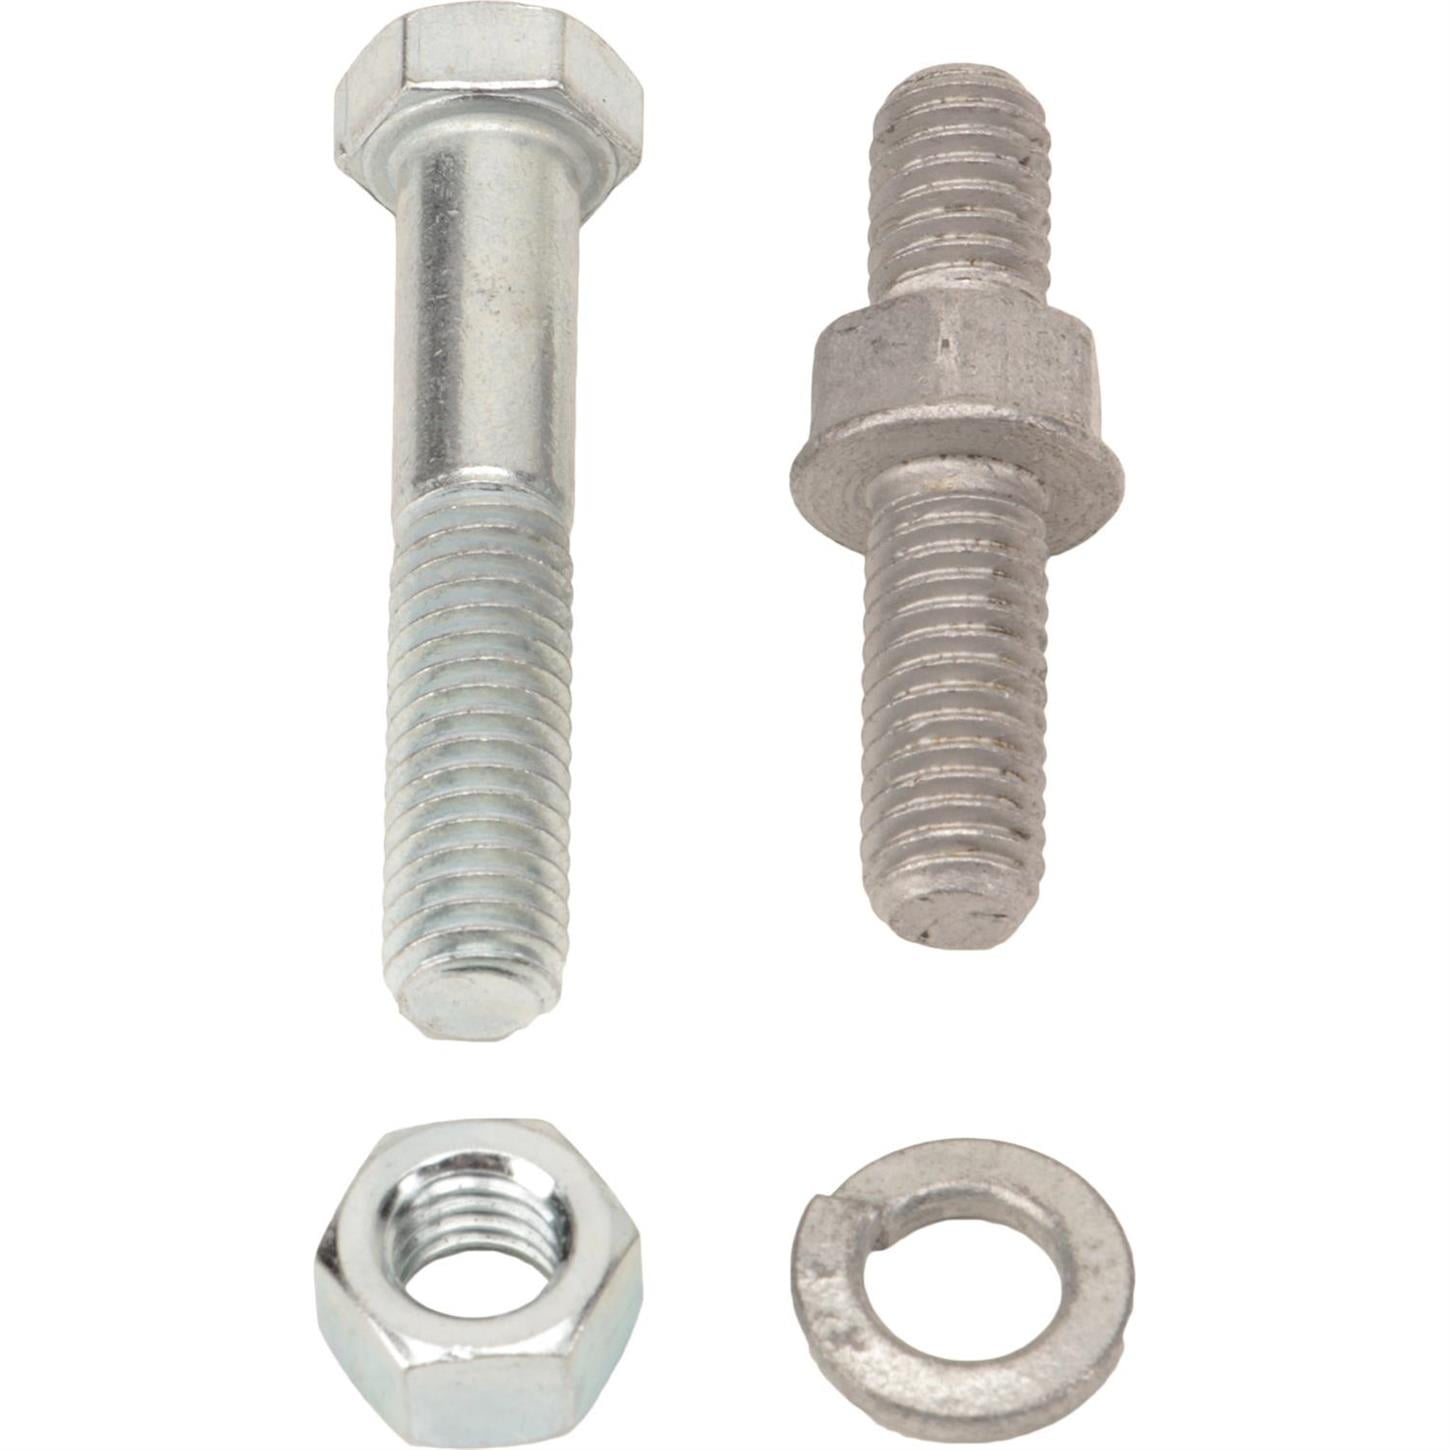 Thermostat Housing Bolt Set for Small Block Chevy, 1967-74 - Walmart.com